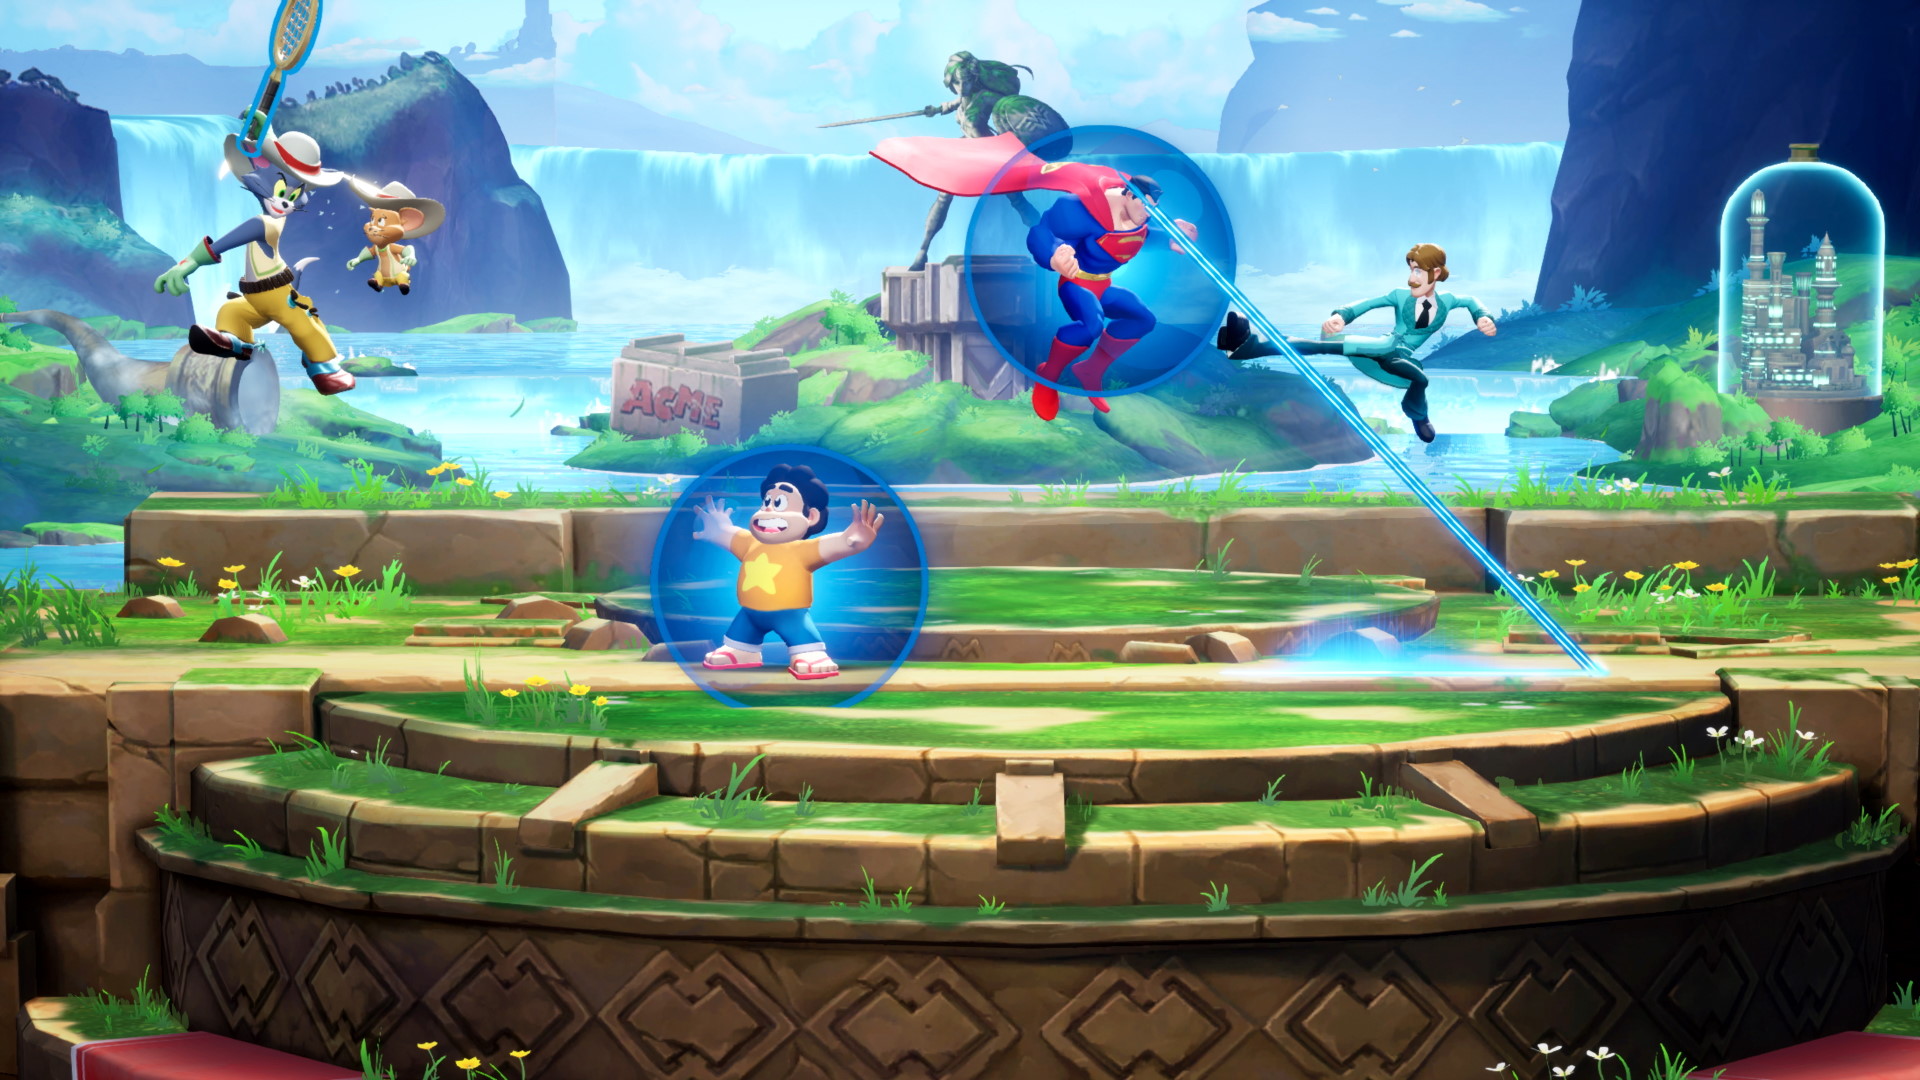 The Multiversus alpha is getting the seal of approval from Smash Bros pros